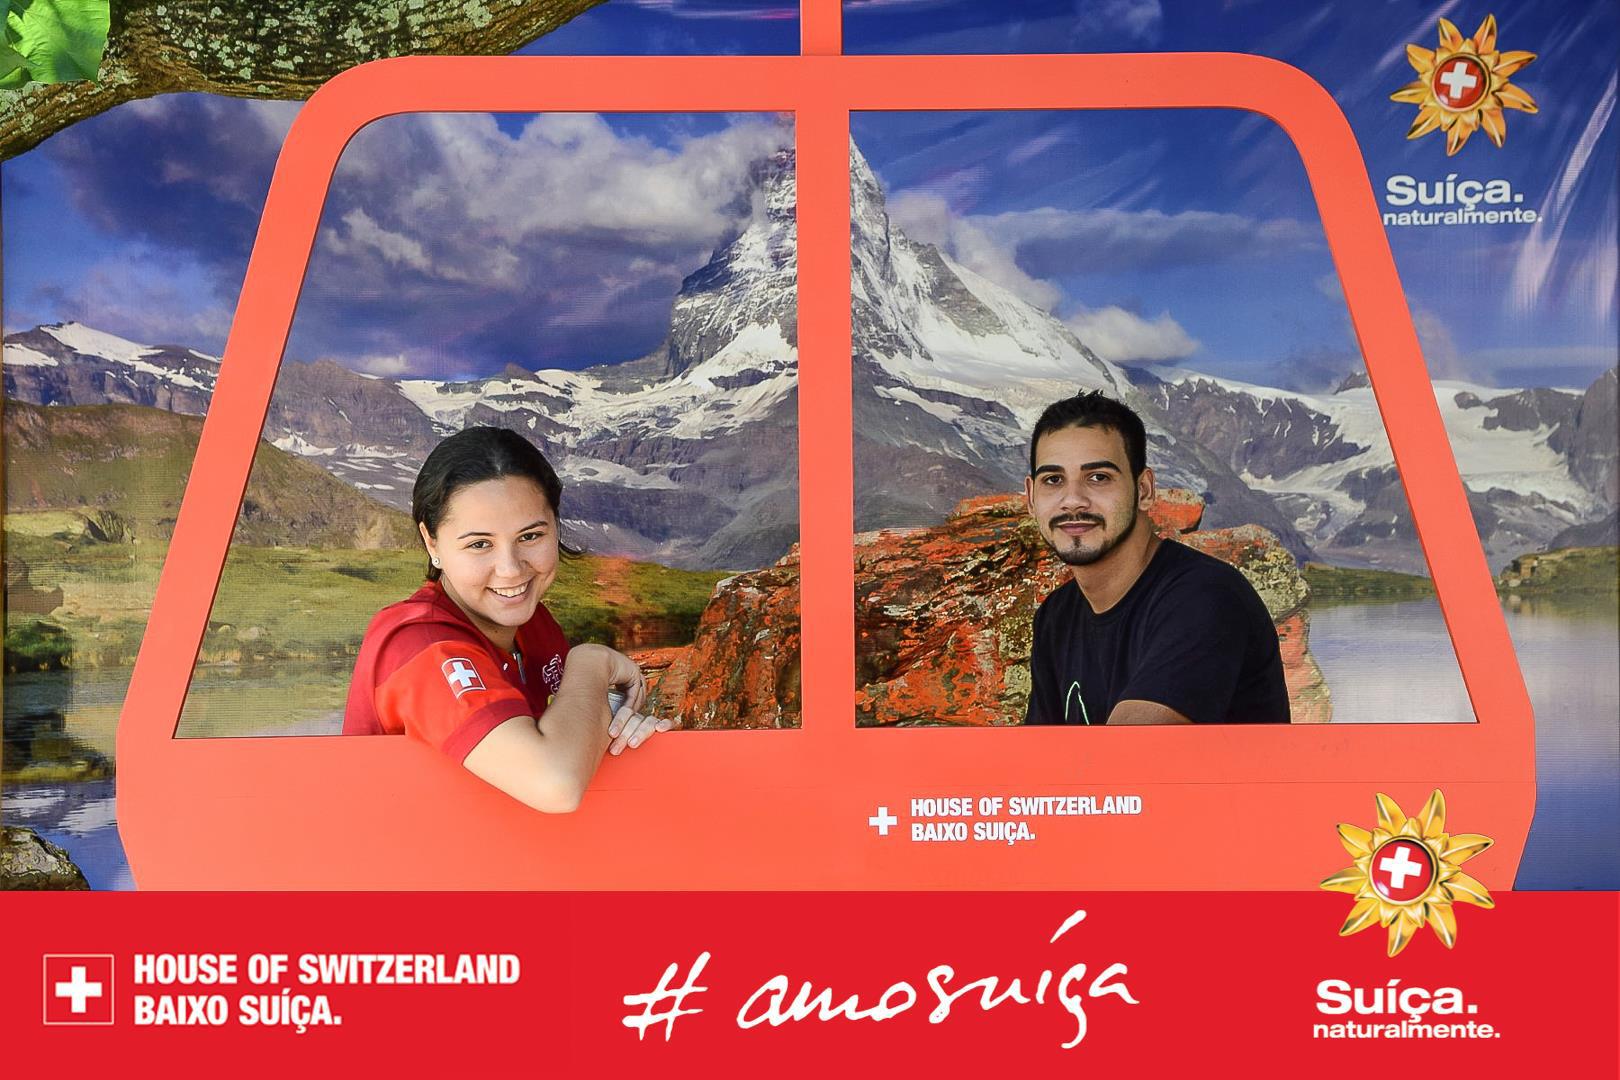 Photopoint at House of Switzerland, Rio 2014